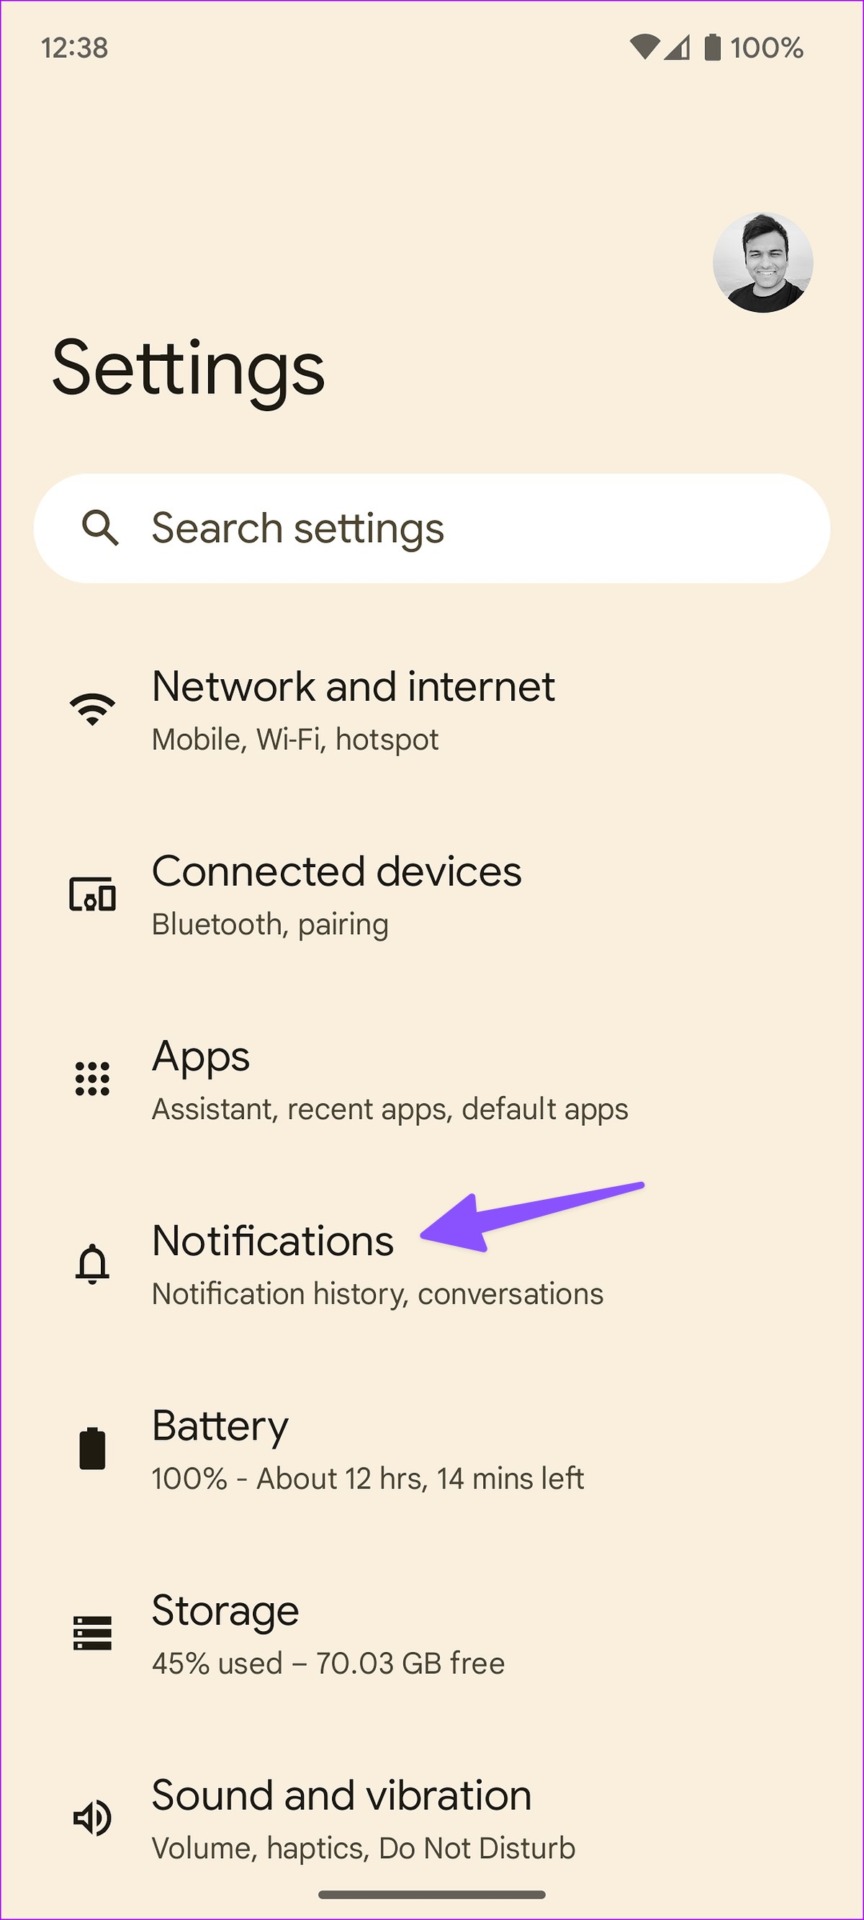 Notifications in Android settings